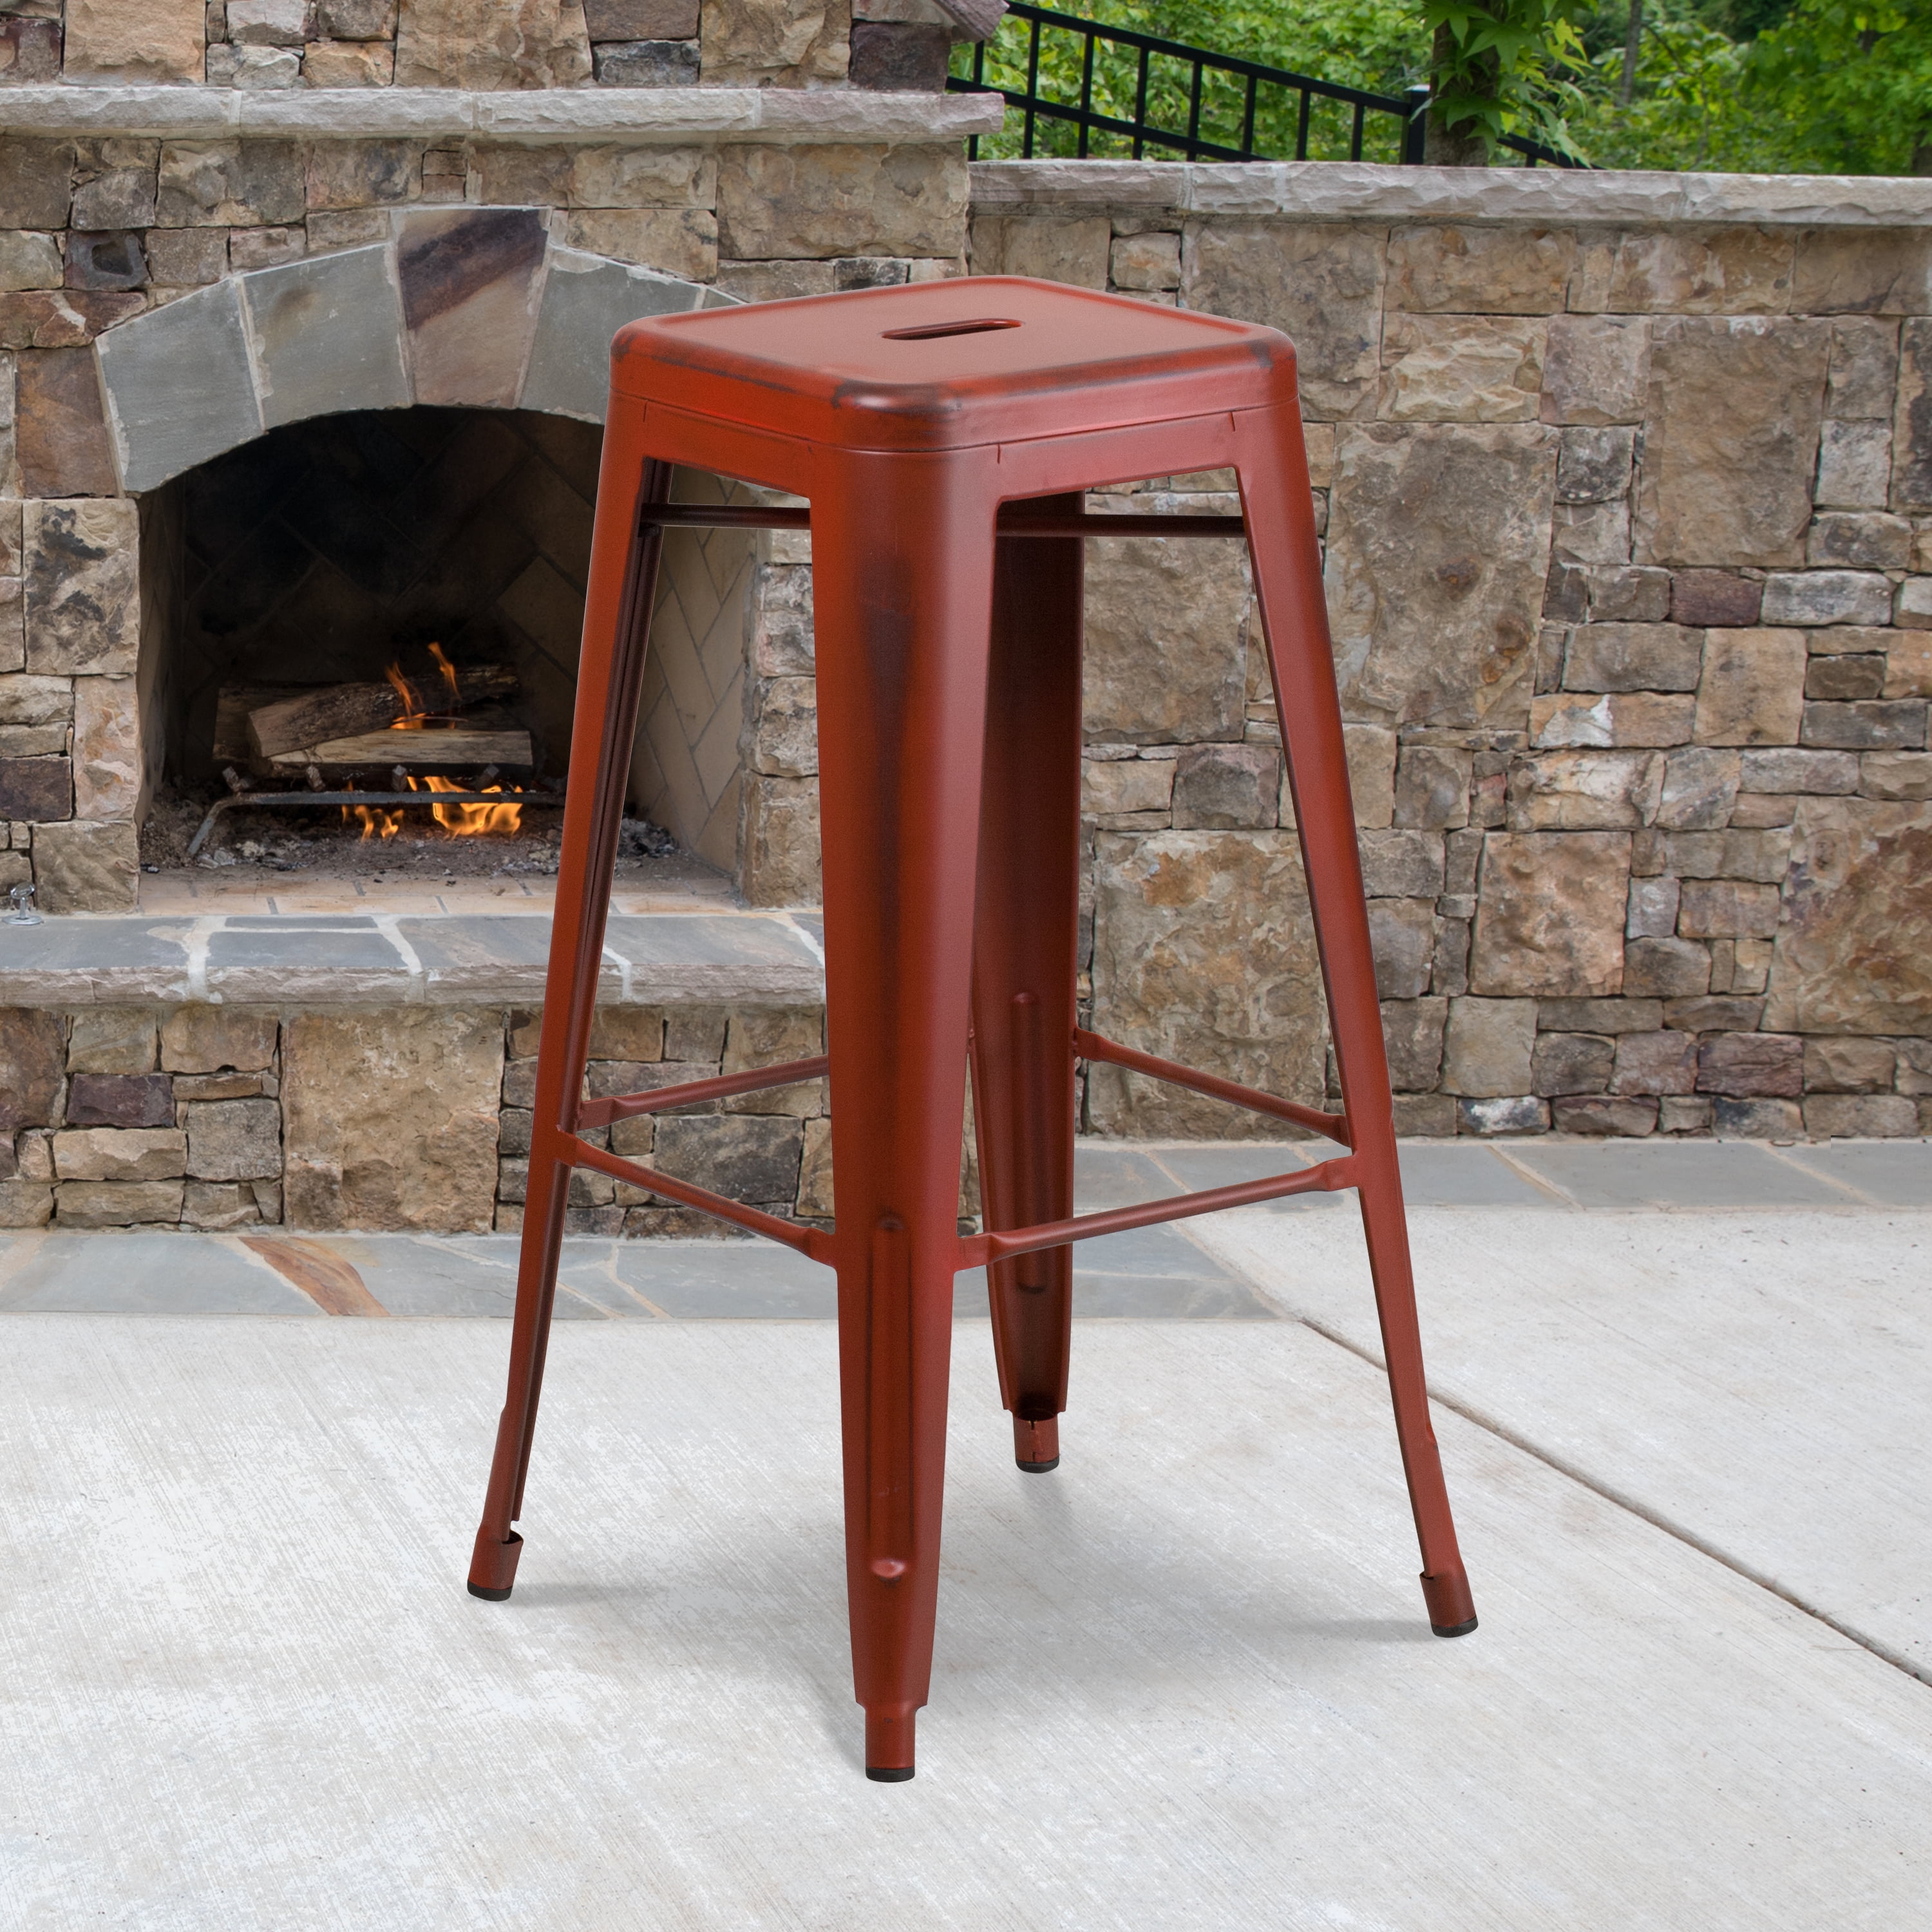 Patio Chair, Distressed Red Metal Bar Stools